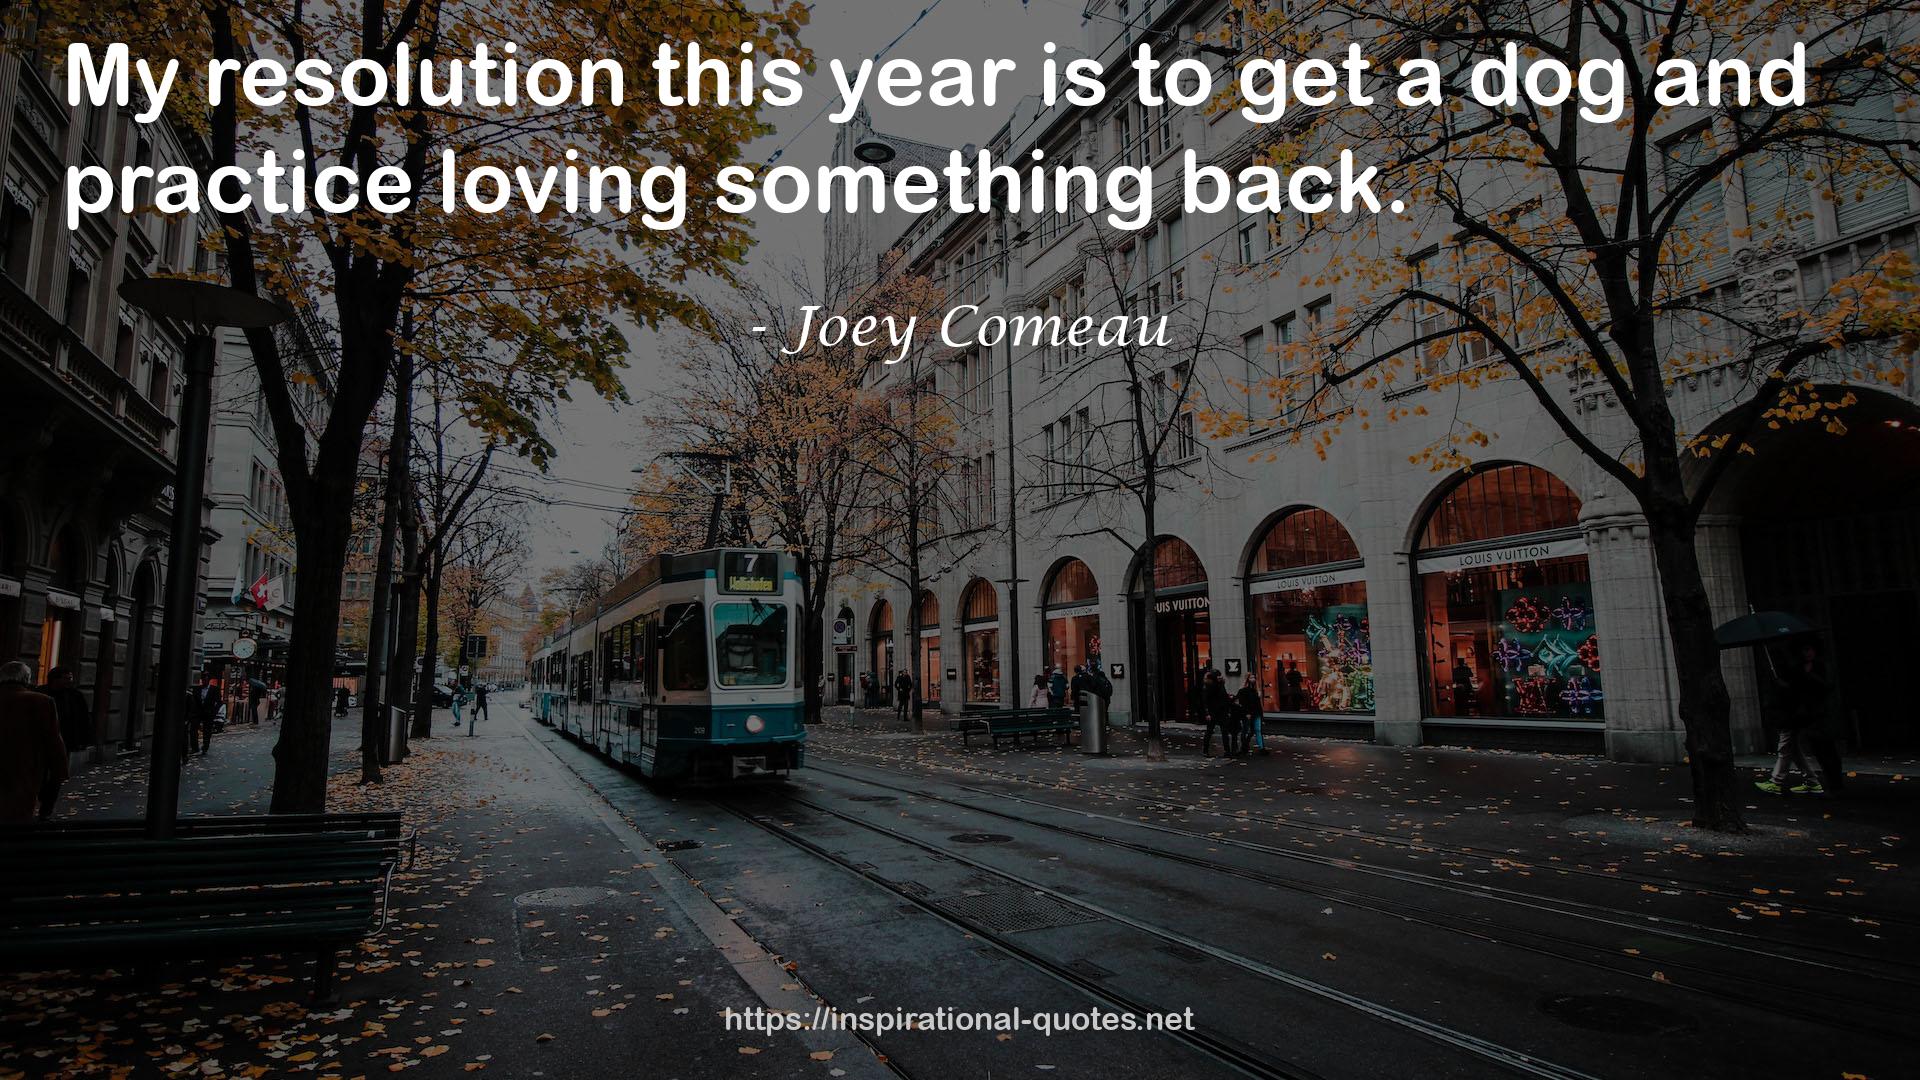 Joey Comeau QUOTES